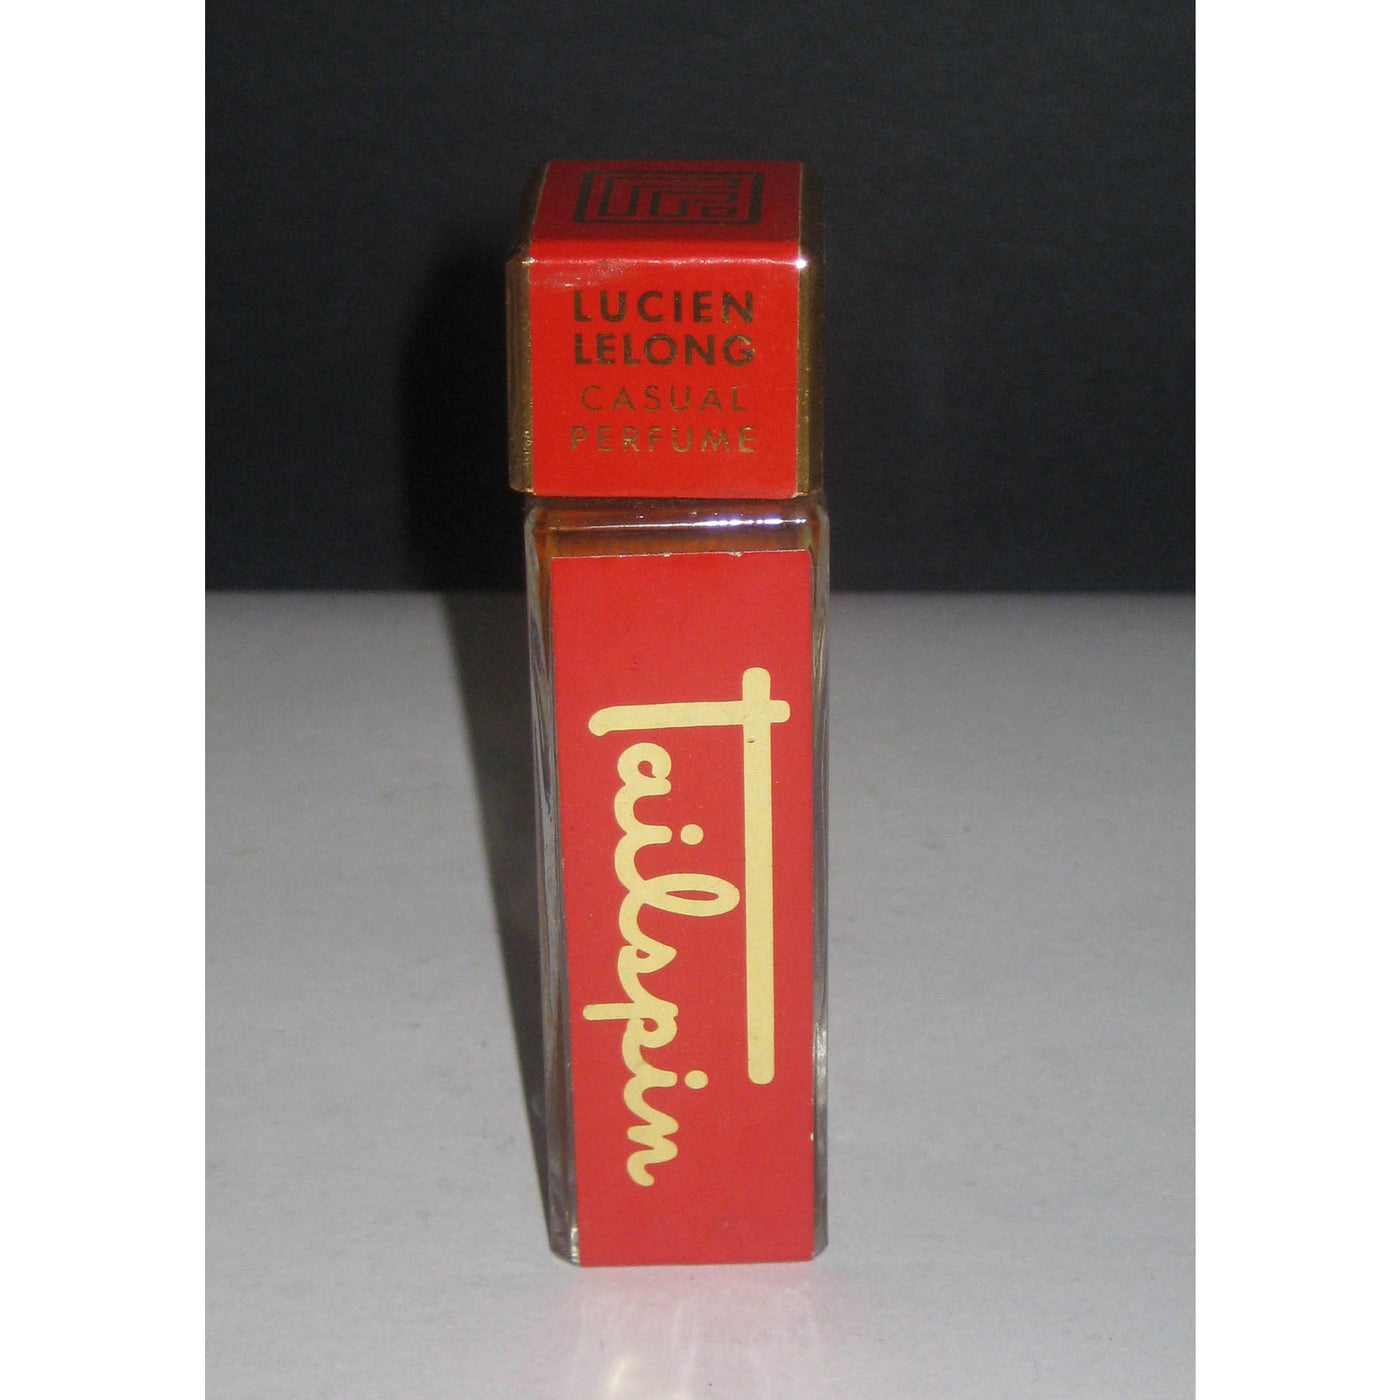 Vintage Lucien Lelong Tailspin Casual Perfume